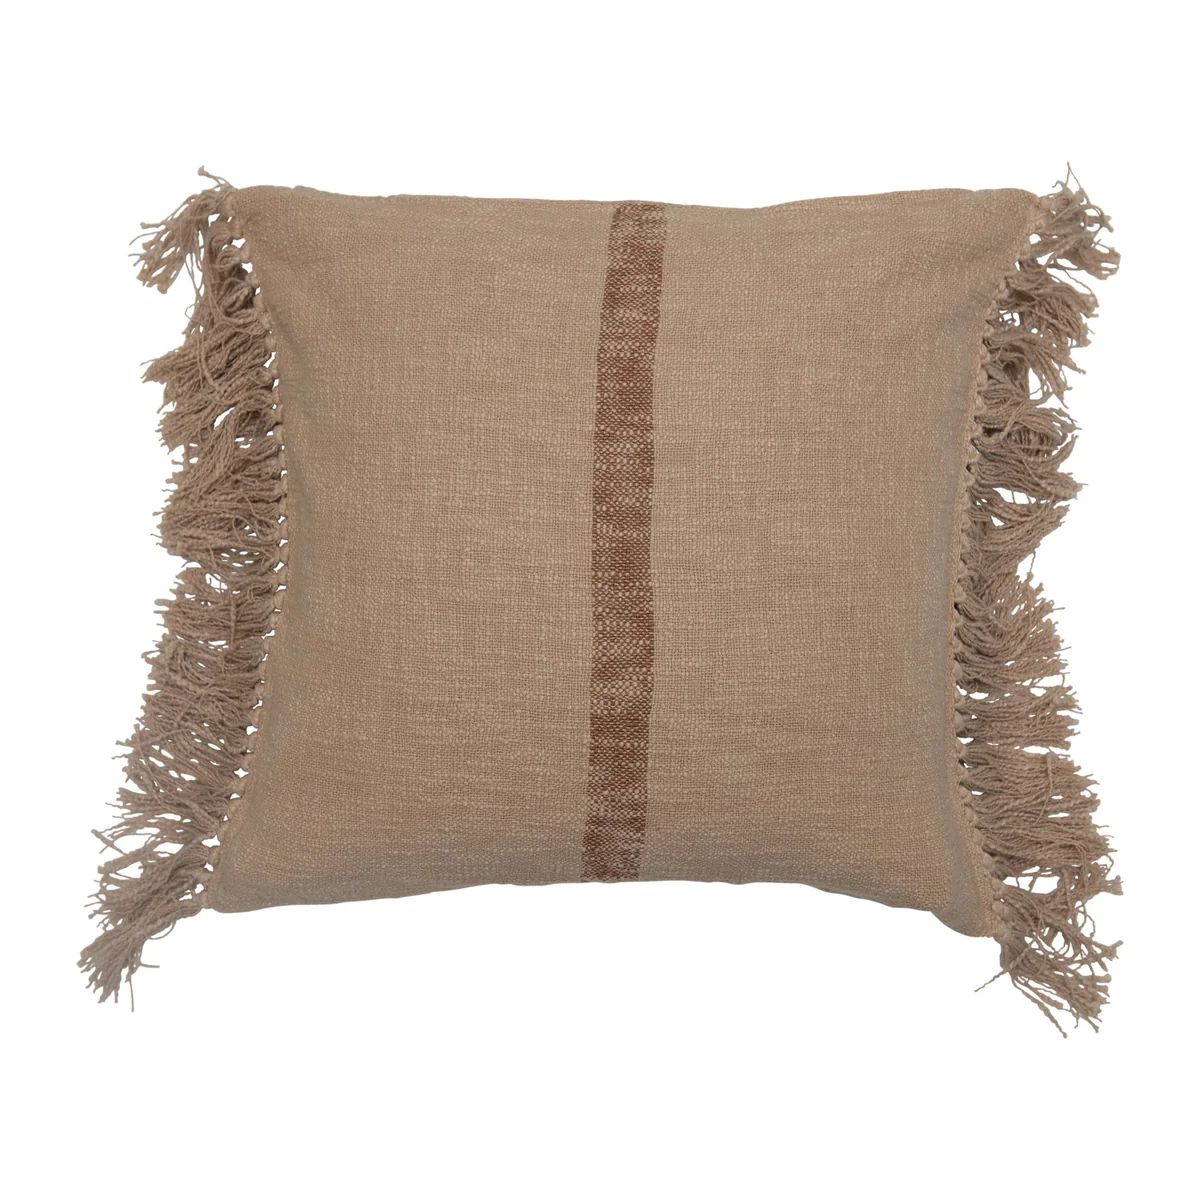 Square Striped Cotton Pillow with Fringe | APIARY by The Busy Bee